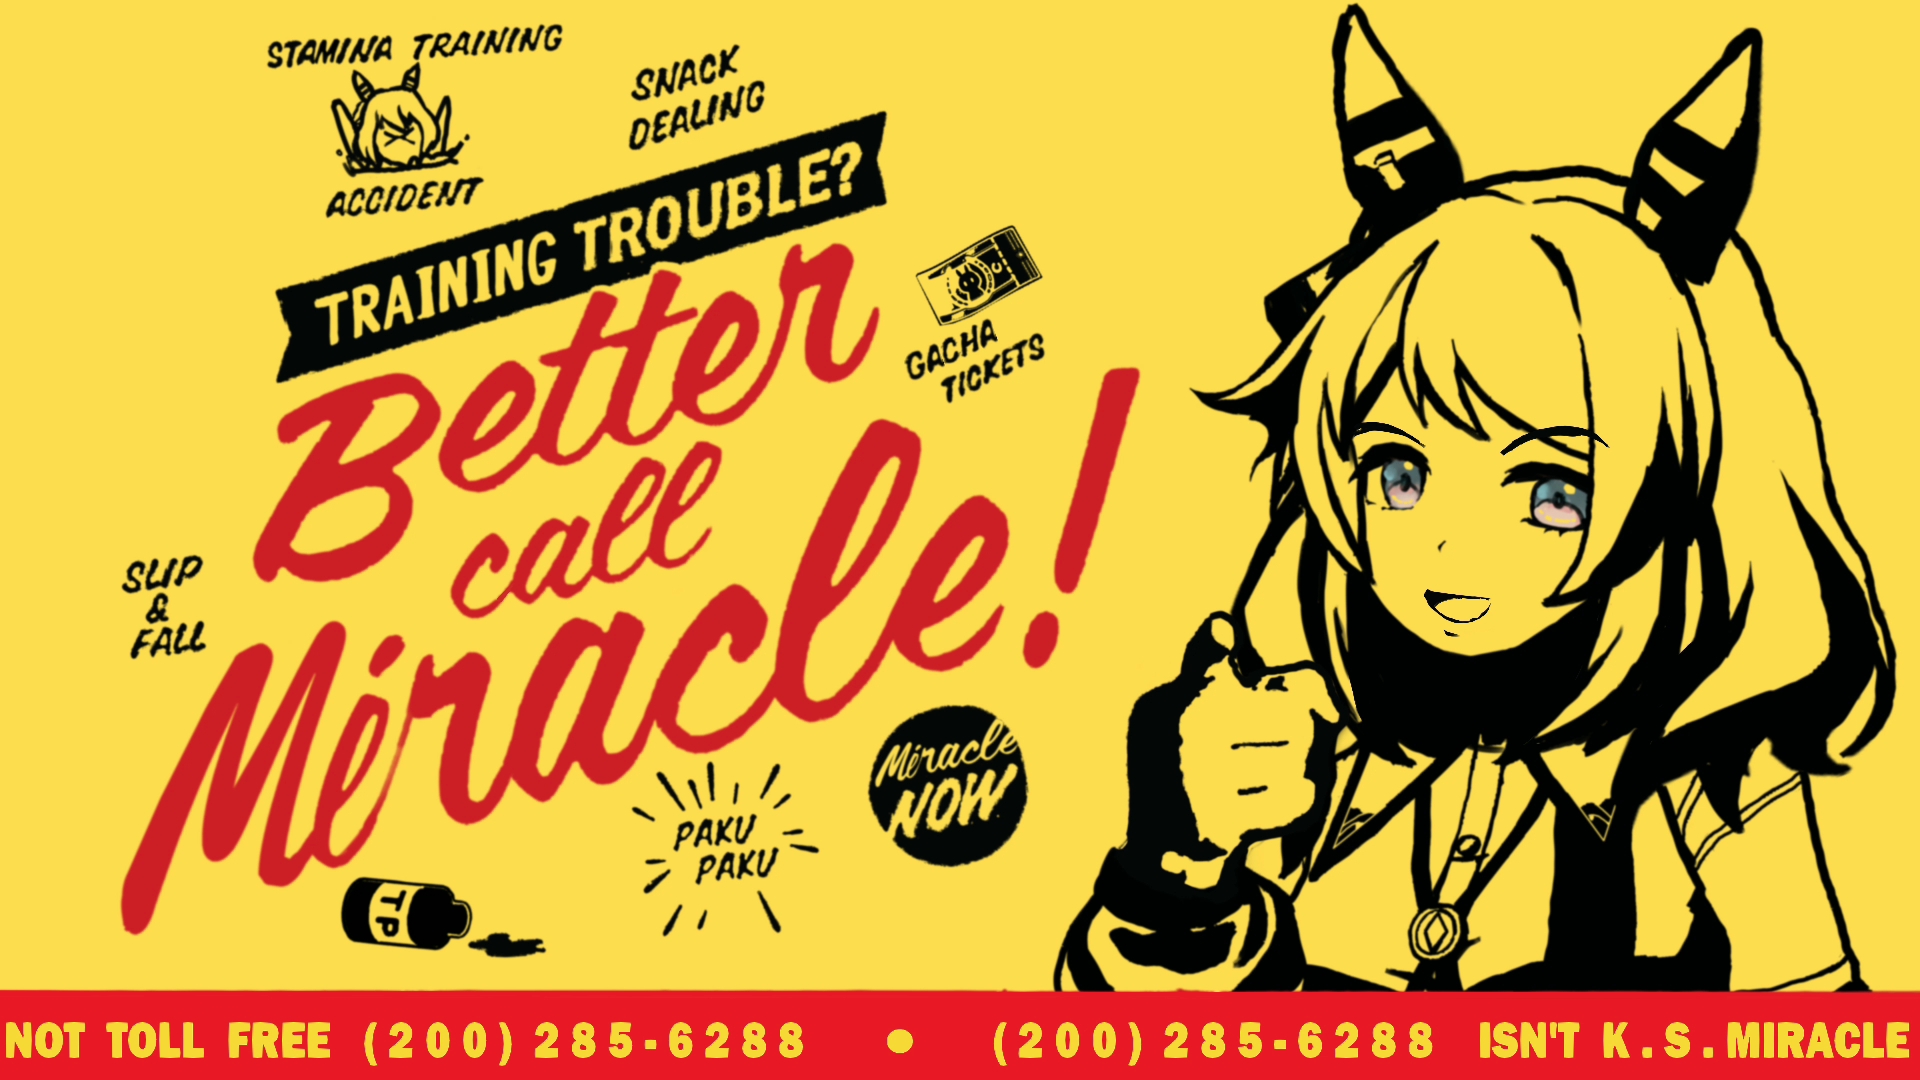 Better call miracle！